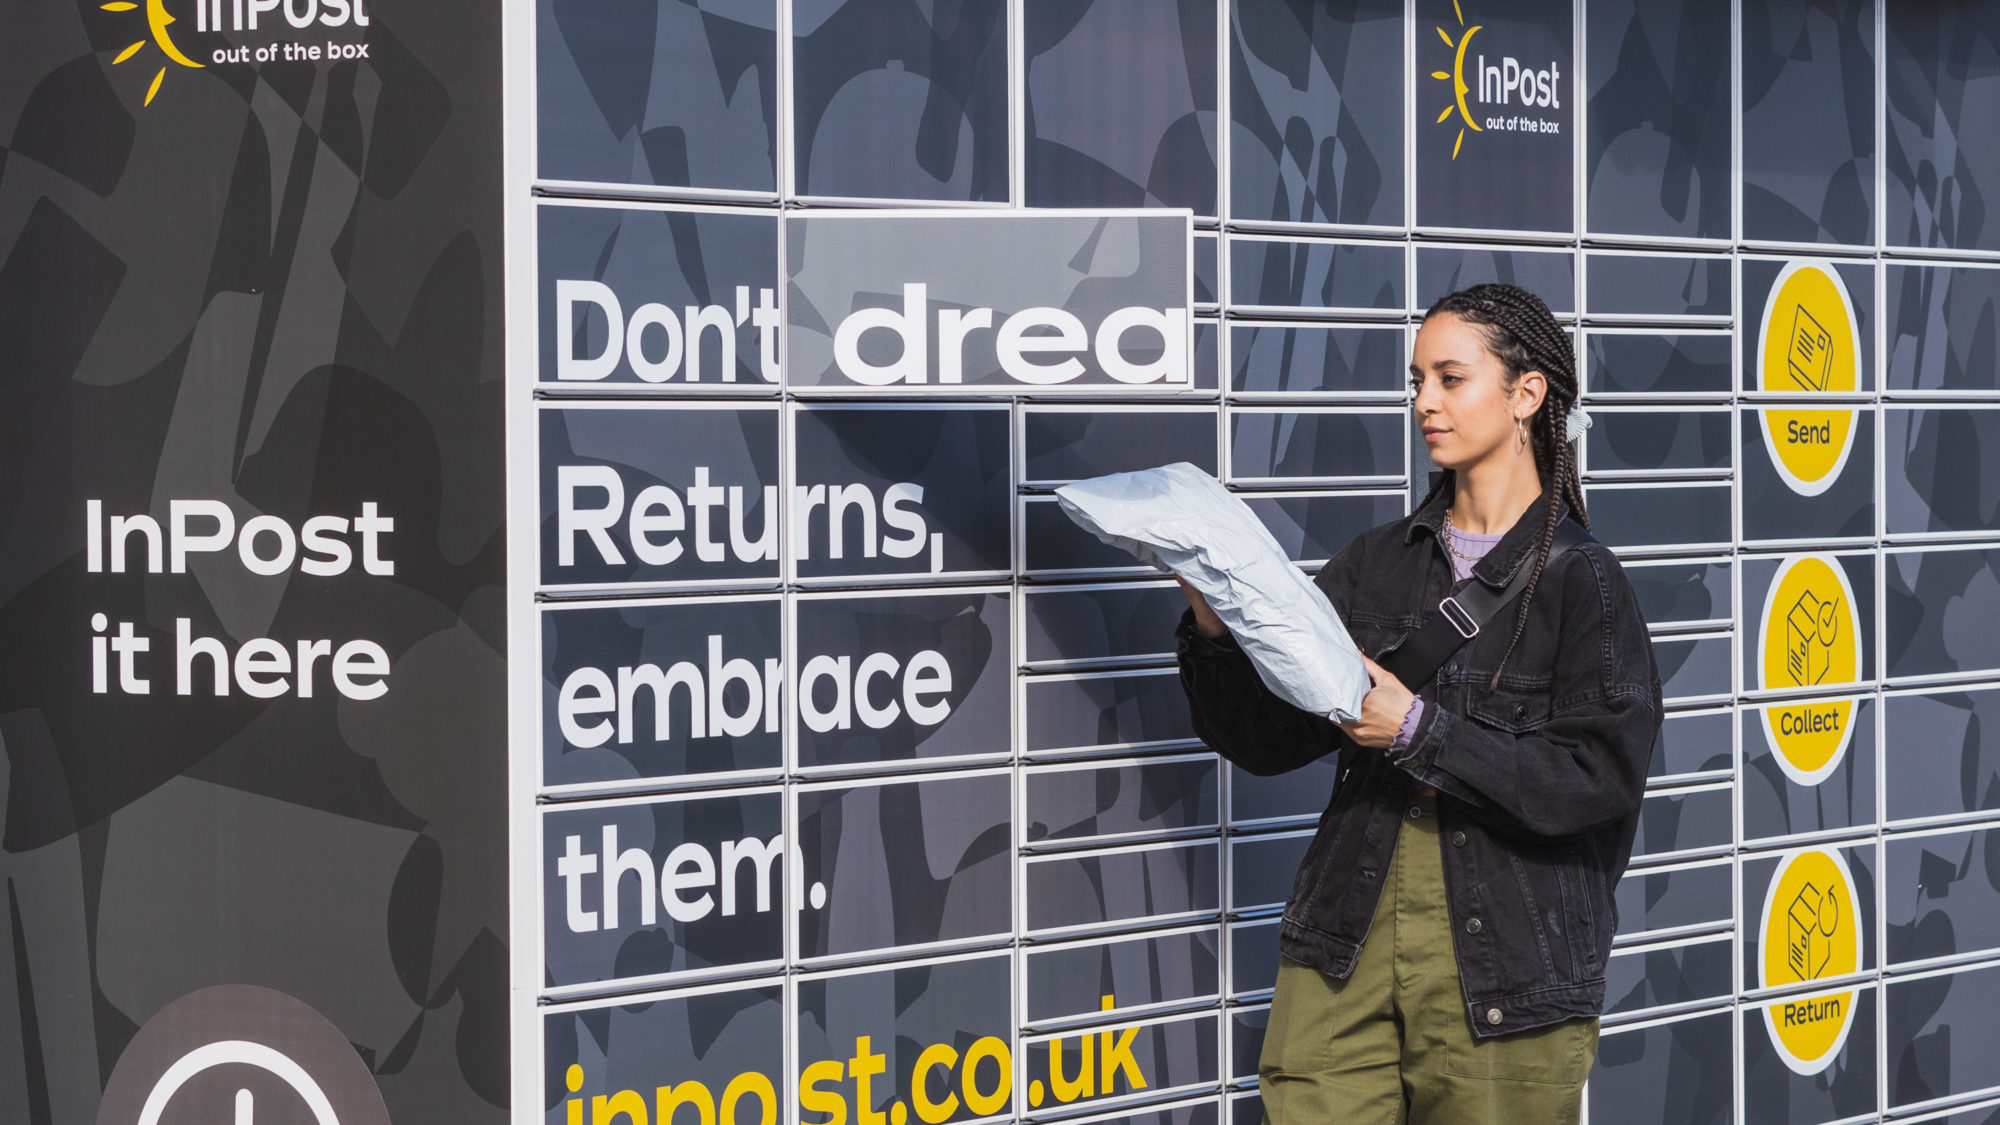 InPost partners with Sports Direct